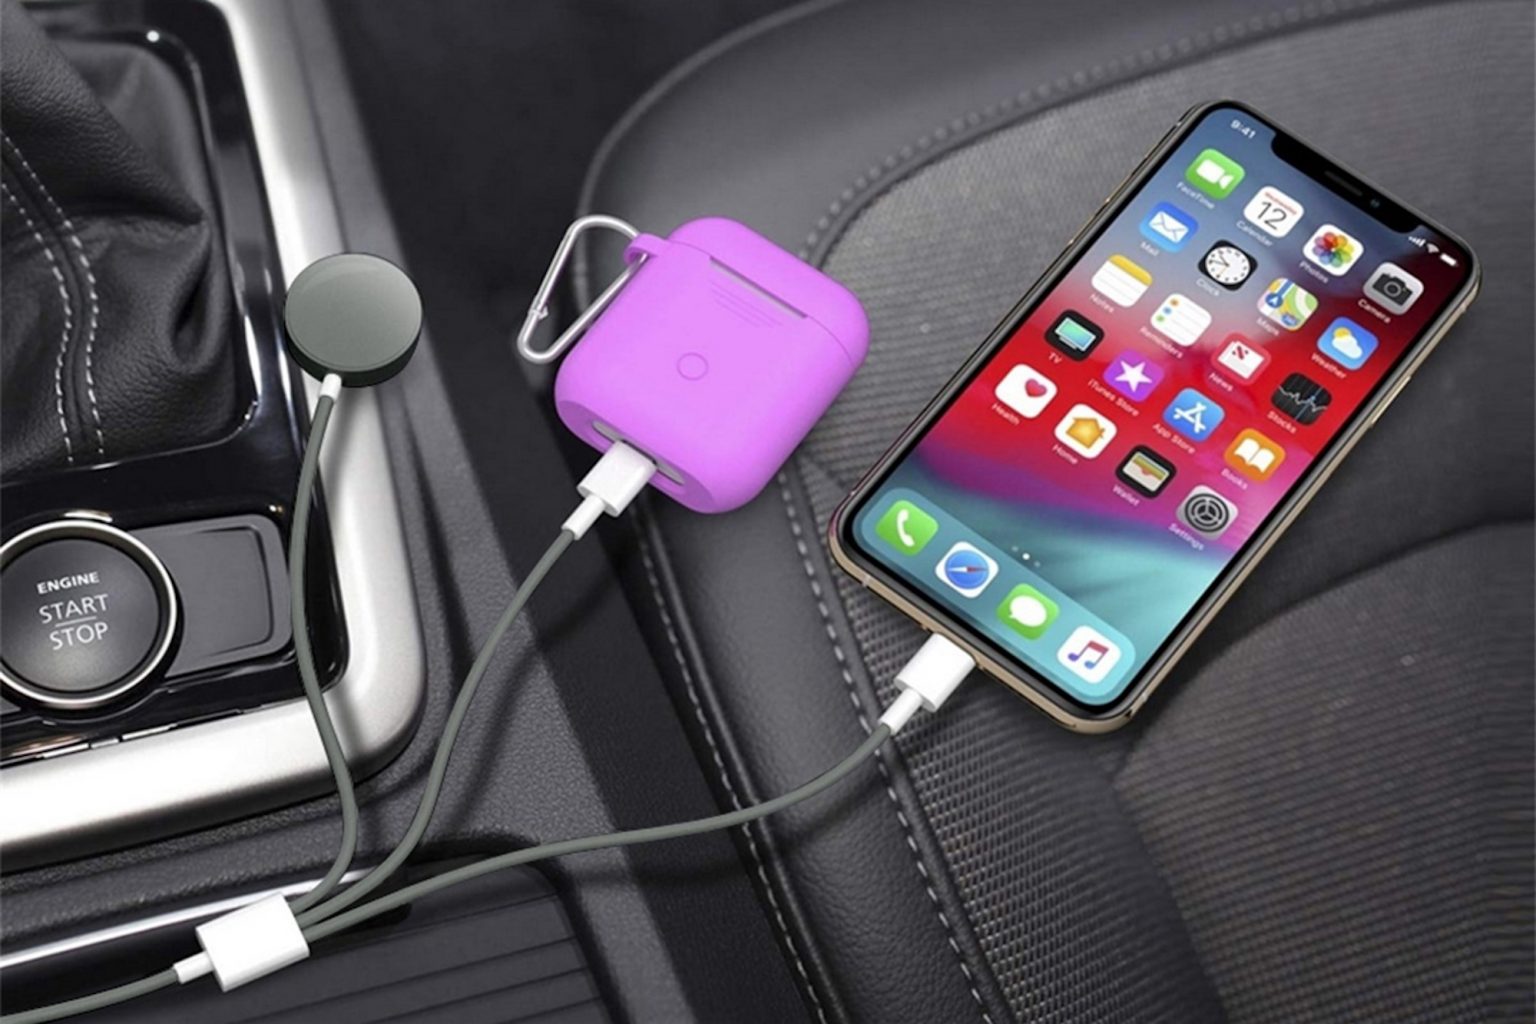 This 3-in-1 Apple Watch & Lightning Charger Cable can charge three devices at once